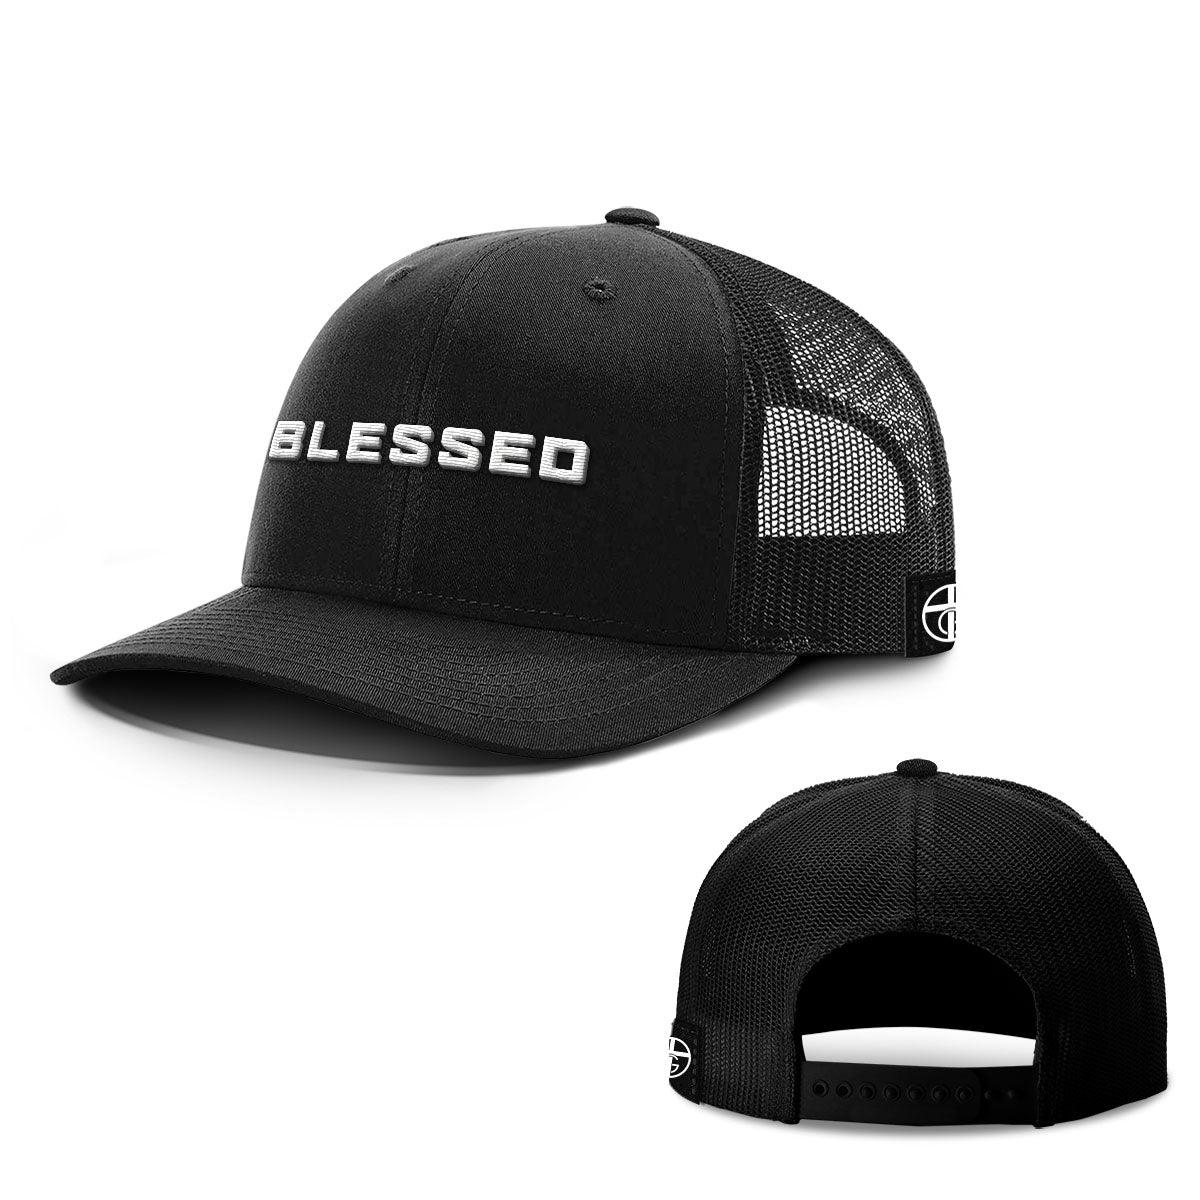 Blessed Hats - Our True God